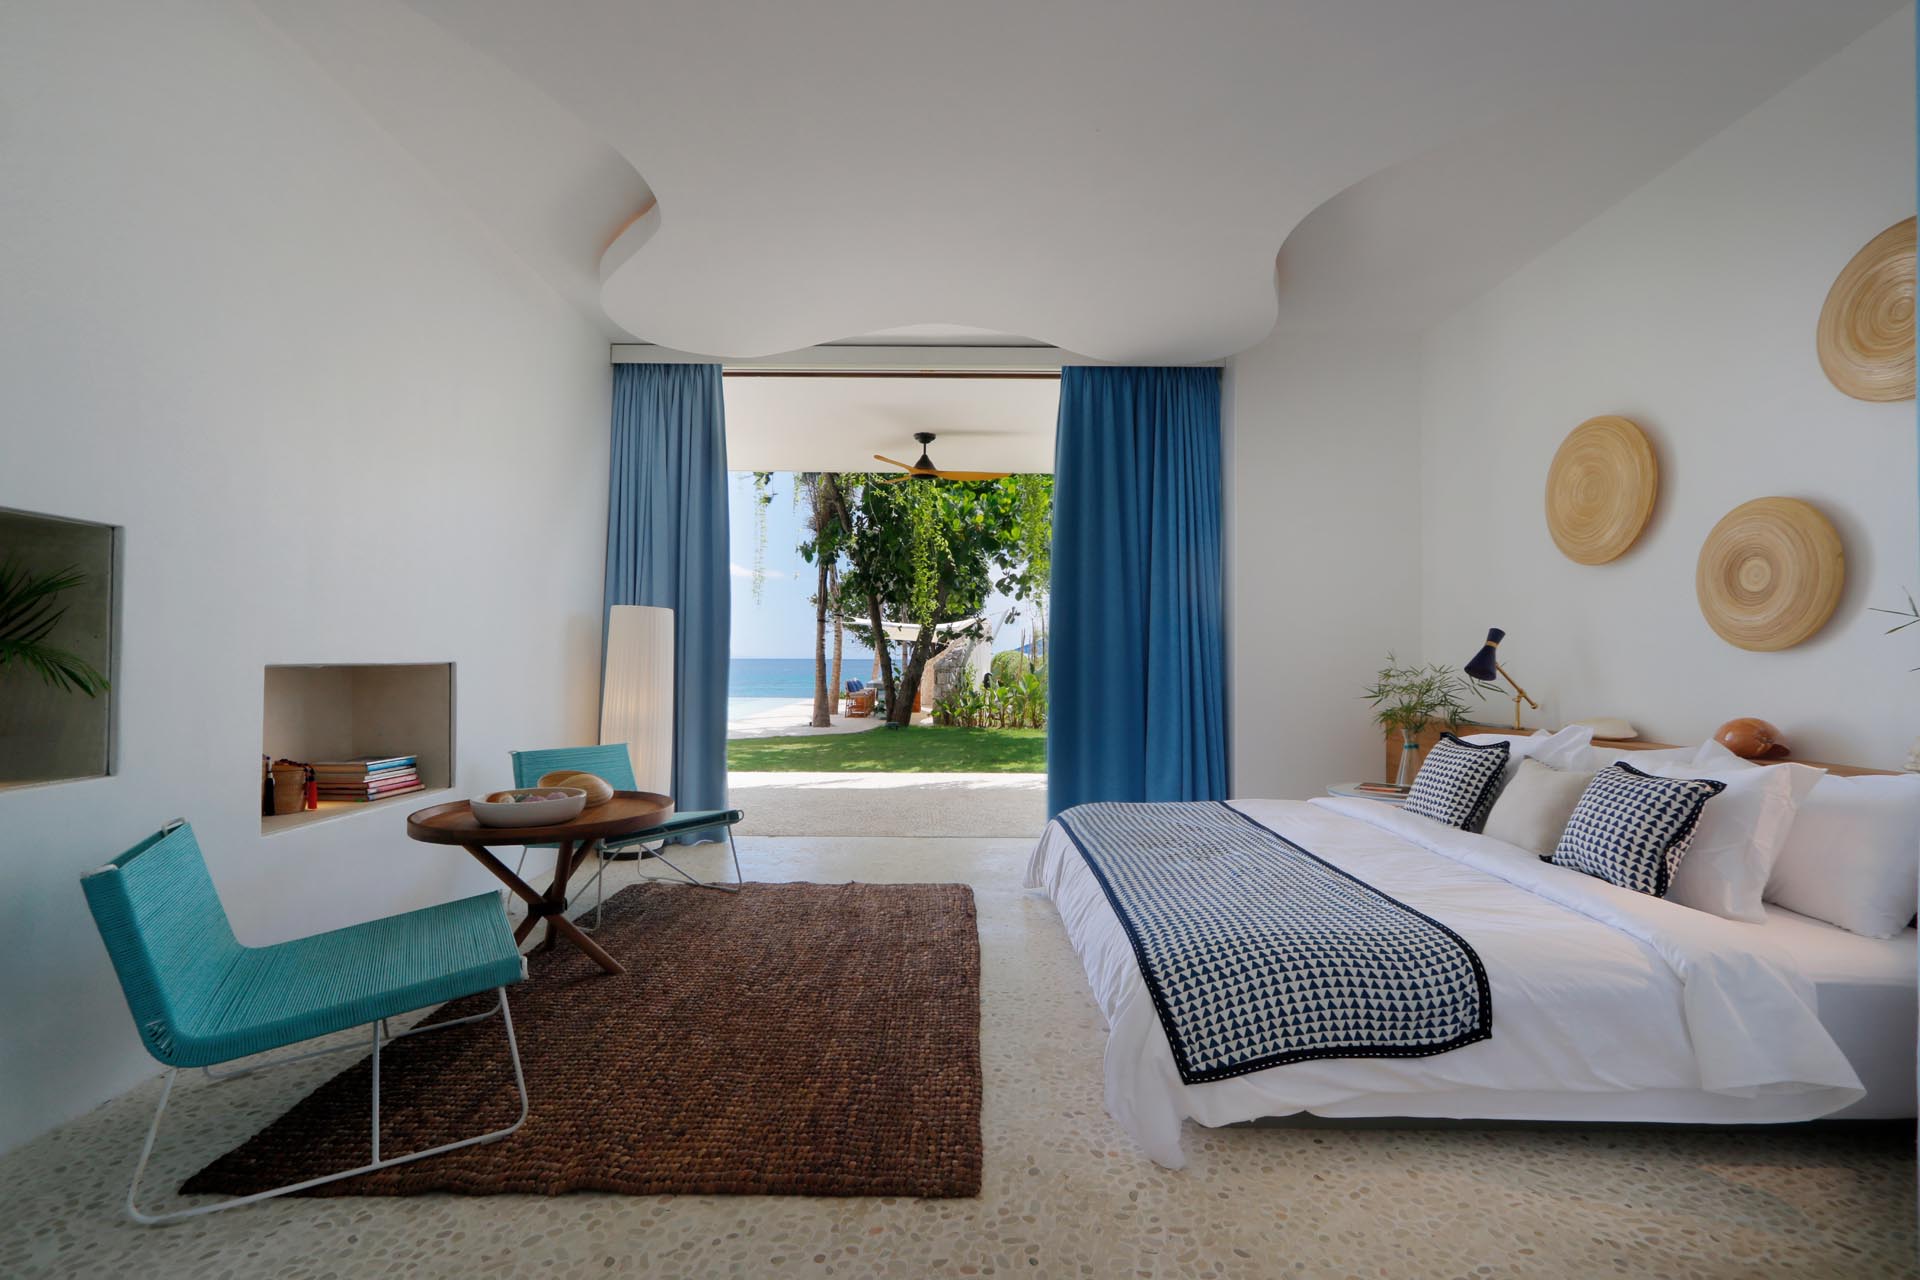 A modern beach house bedroom opens to the outdoors, and has blue accents.